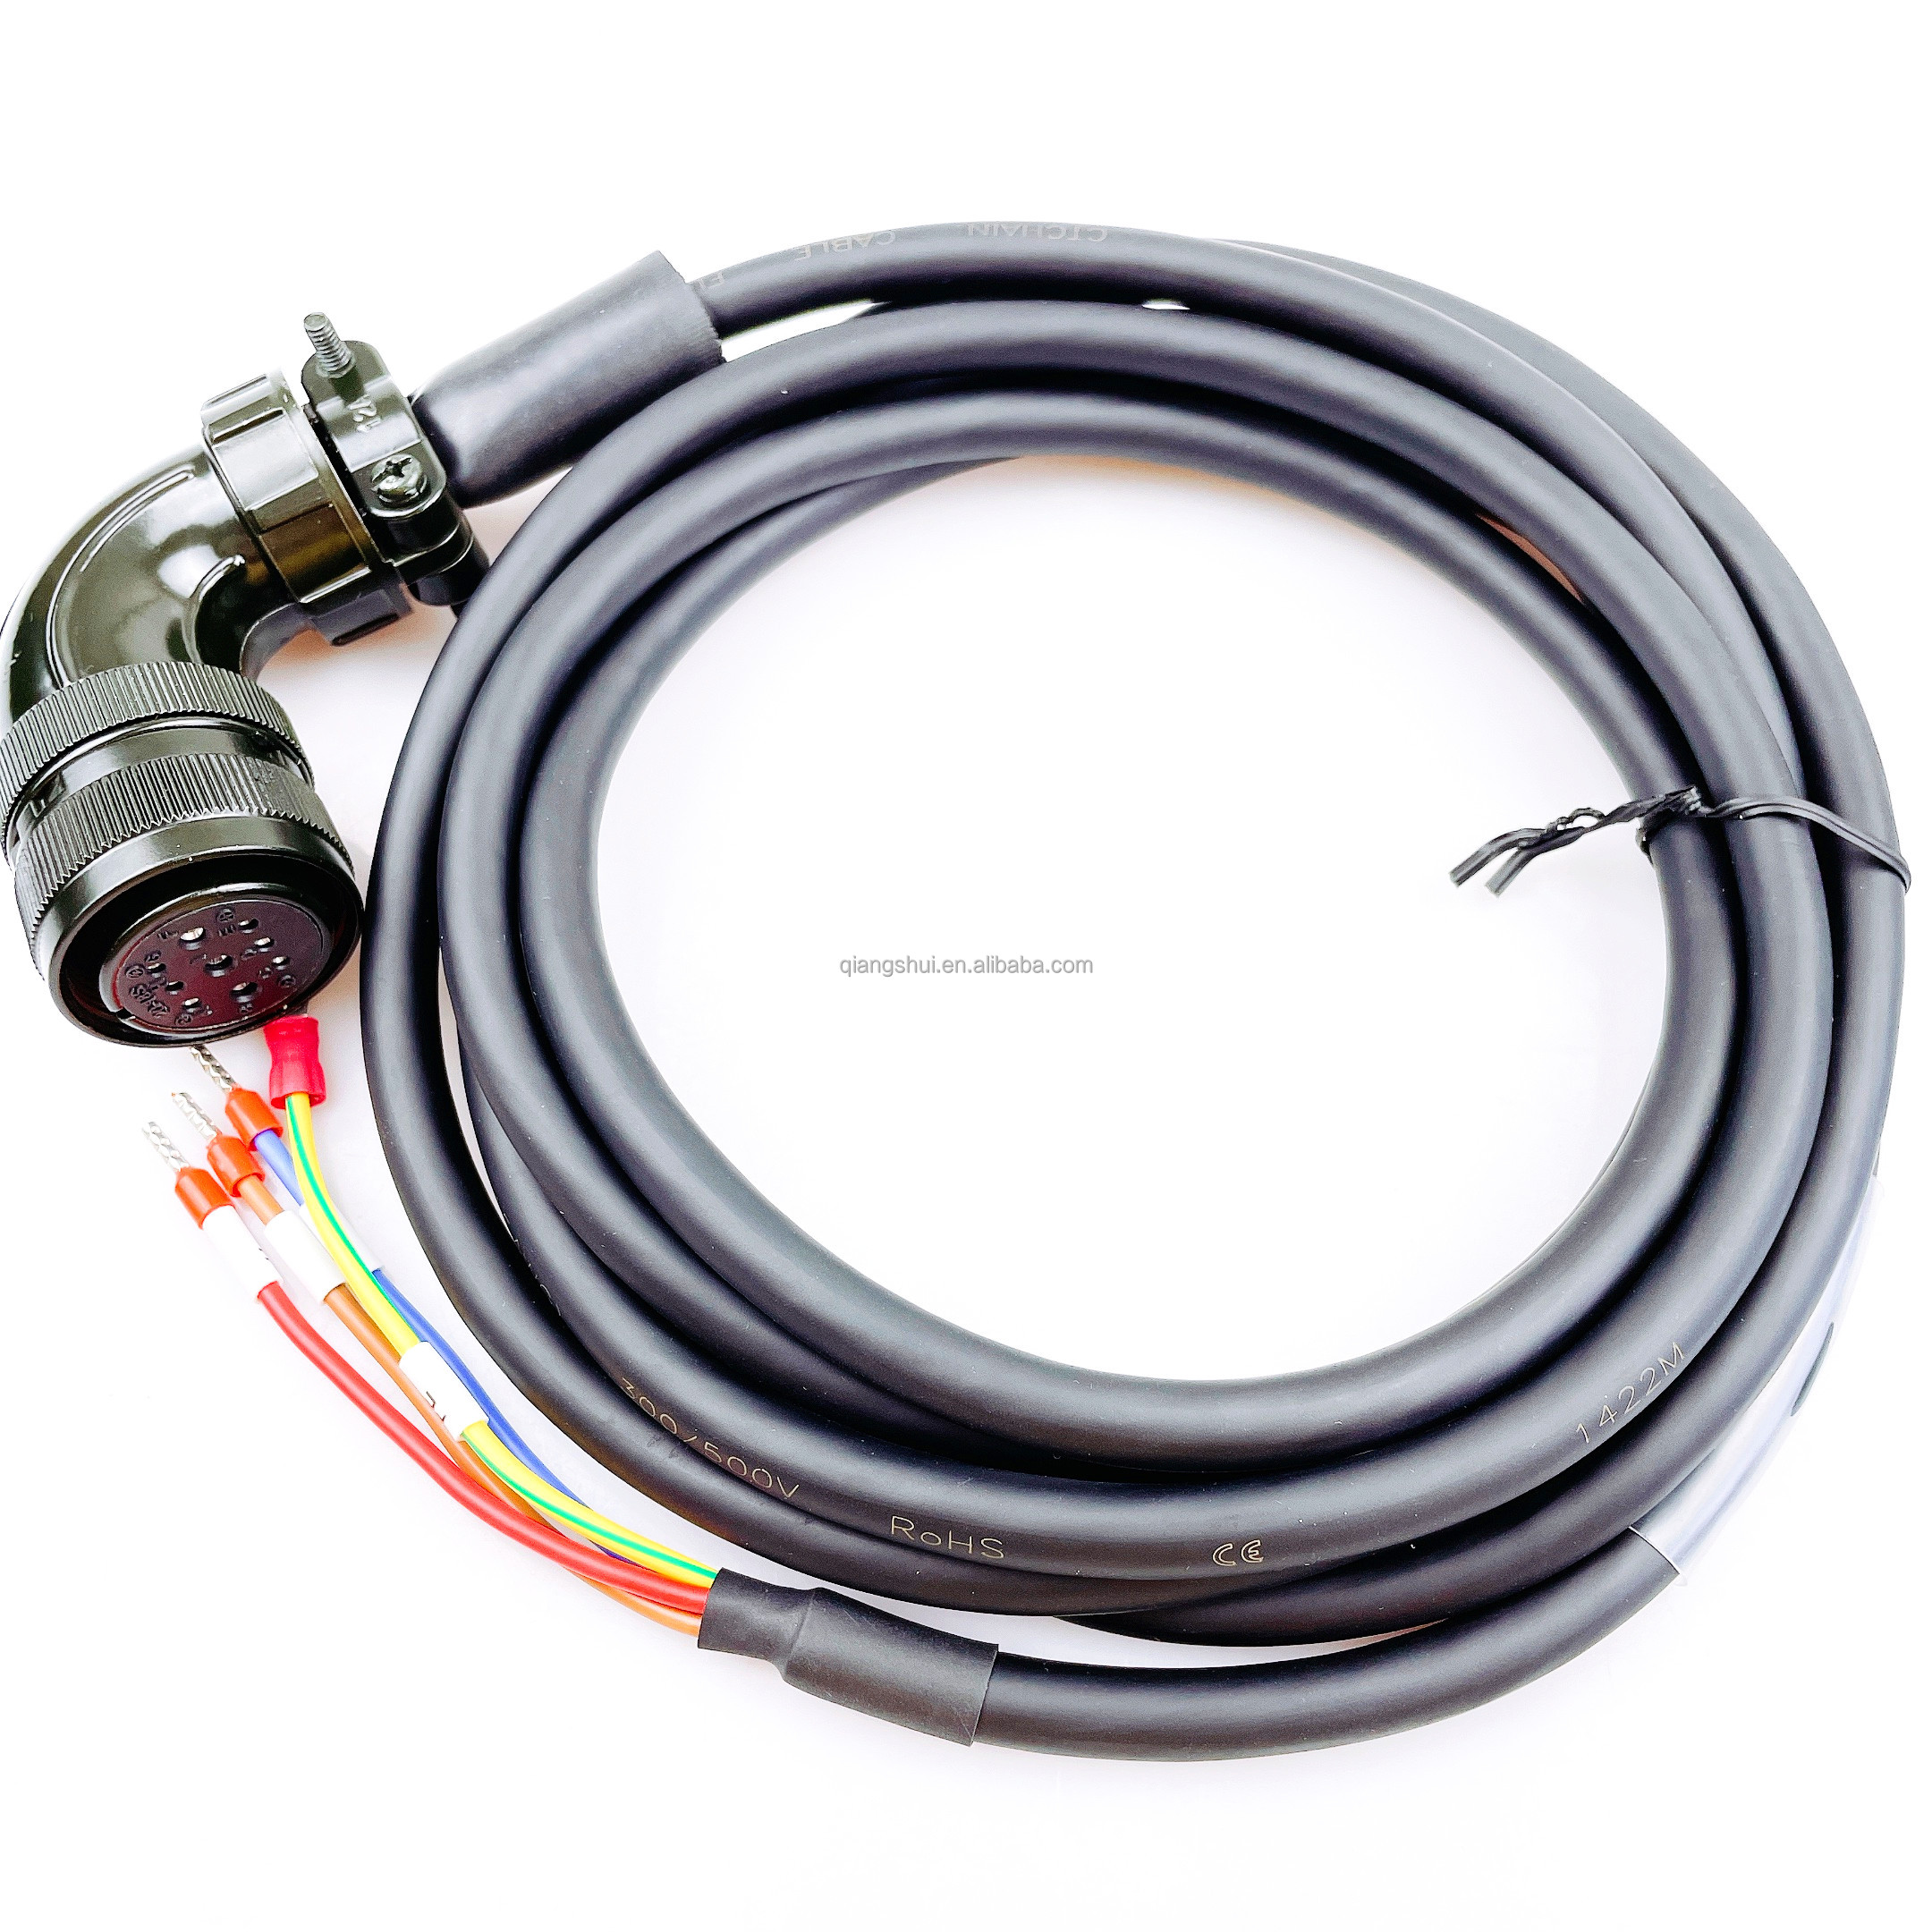 Servo Drive Power cable 20m. 1.5mm²/ AWG16. for servo motors MS1H2 =5KW. MS1H3 = 1.8kW